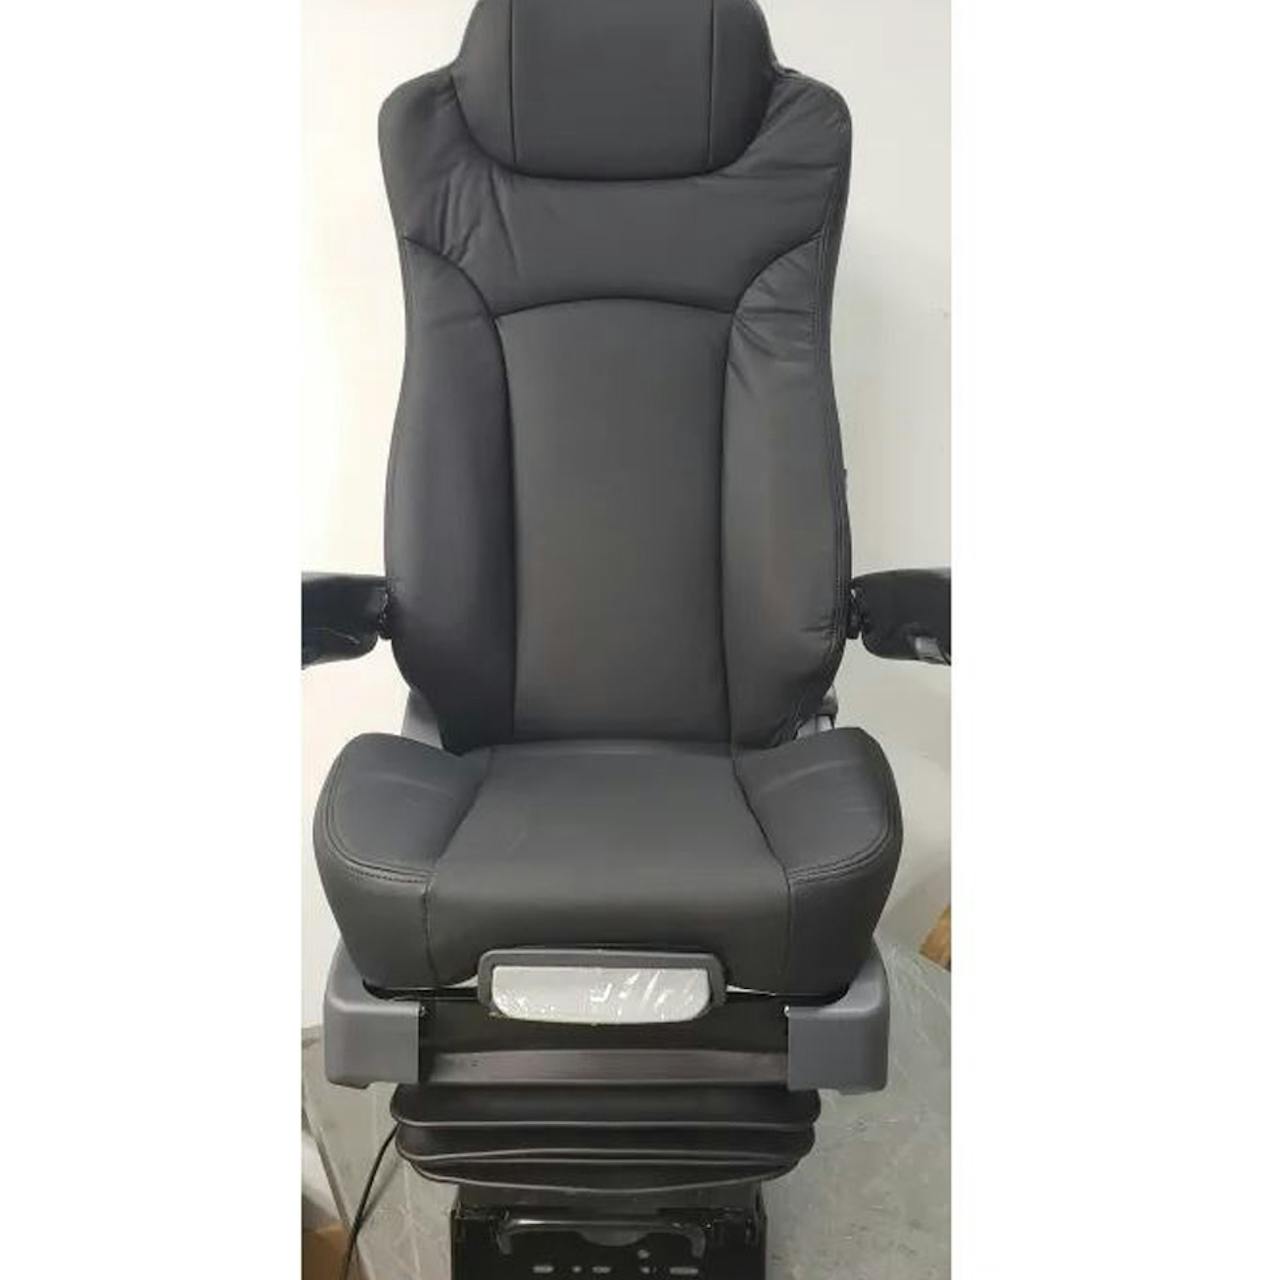 https://raneys-cdn11.imgix.net/images/stencil/original/products/205394/176586/TC200L-Black-Leather-Truck-Seat-Arms-Down__94122.1649273750.JPG?auto=compress,format&w=1280